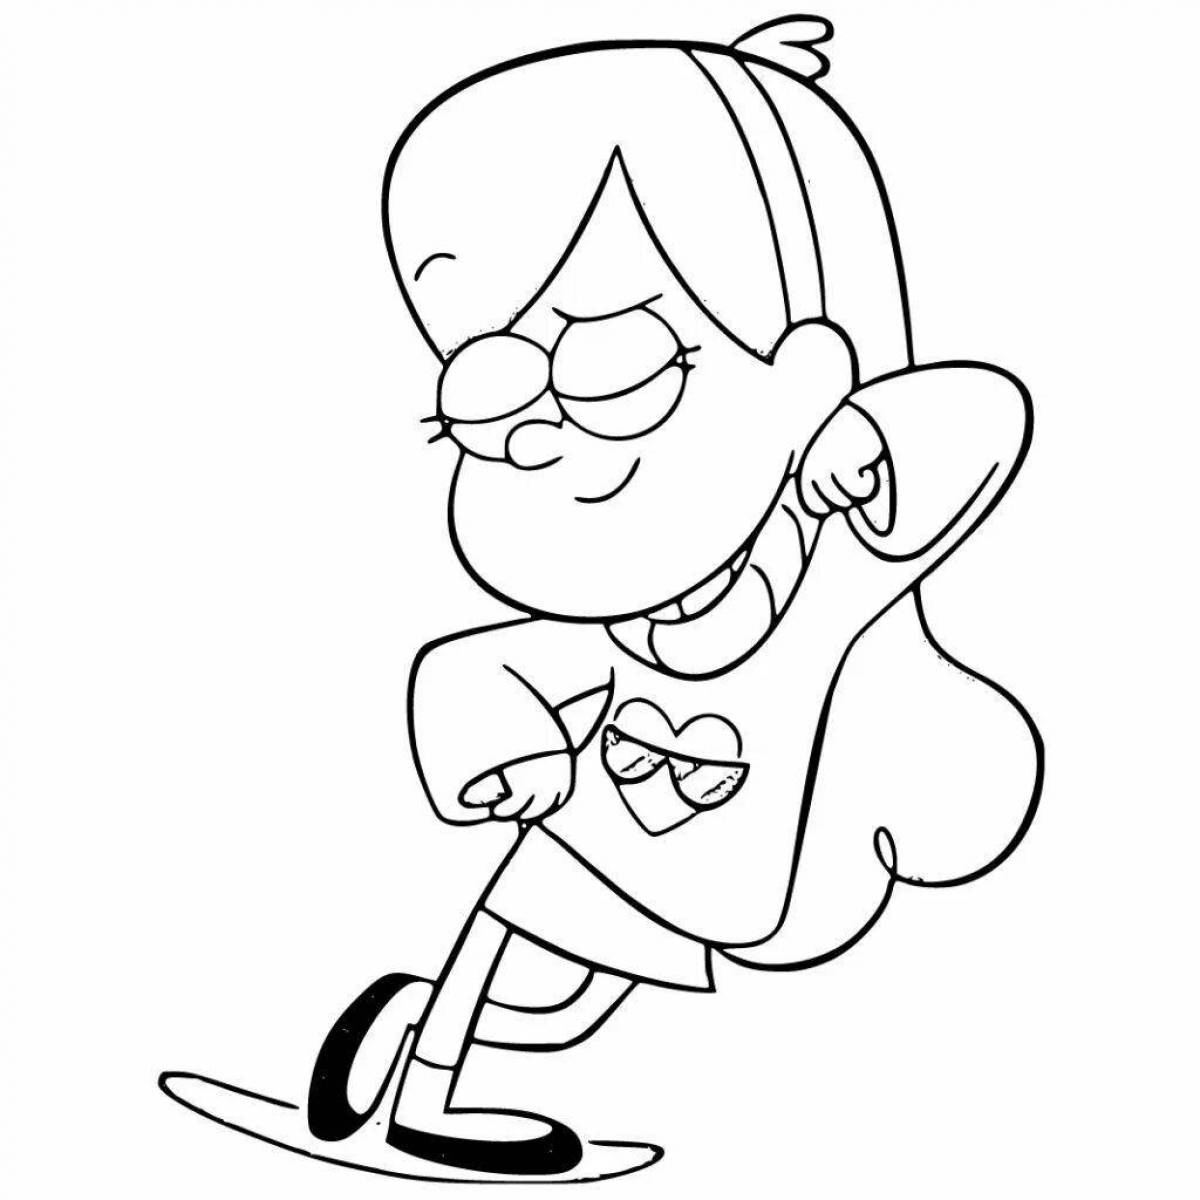 Colorful mabel gravity falls coloring page